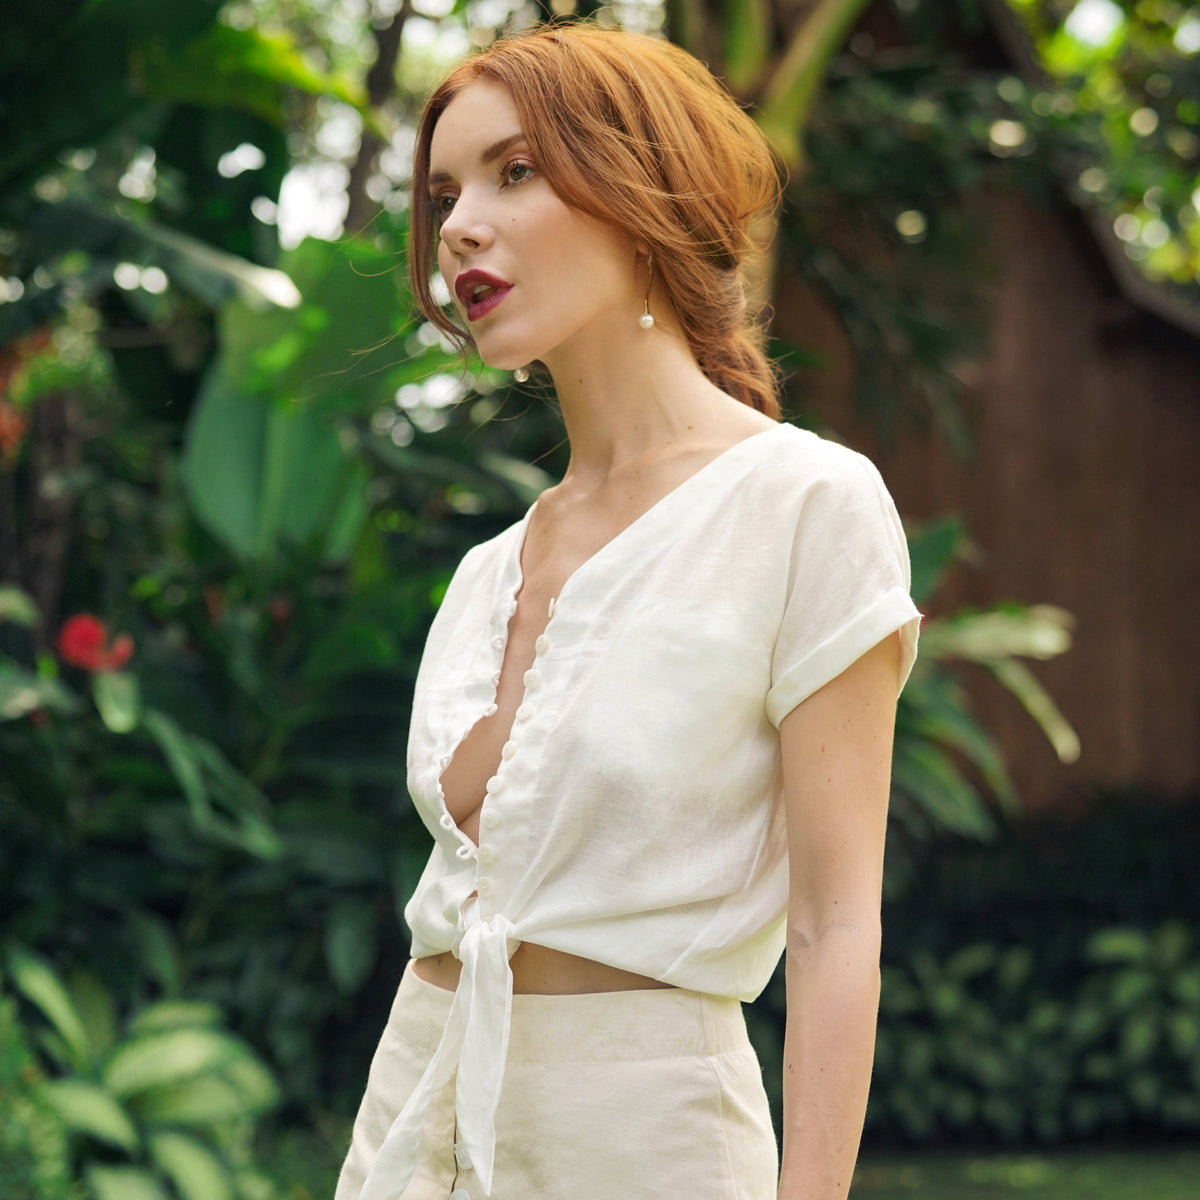 The Lana linen shirt is a versatile and timeless piece that seamlessly blends the relaxed and carefree styles of Bali and California. Made from premium quality linen, this shirt offers a luxurious and comfortable wear that's perfect for any season. The natural fabric is lightweight and breathable, providing a cool and airy feel against the skin, while also being durable and long-lasting.